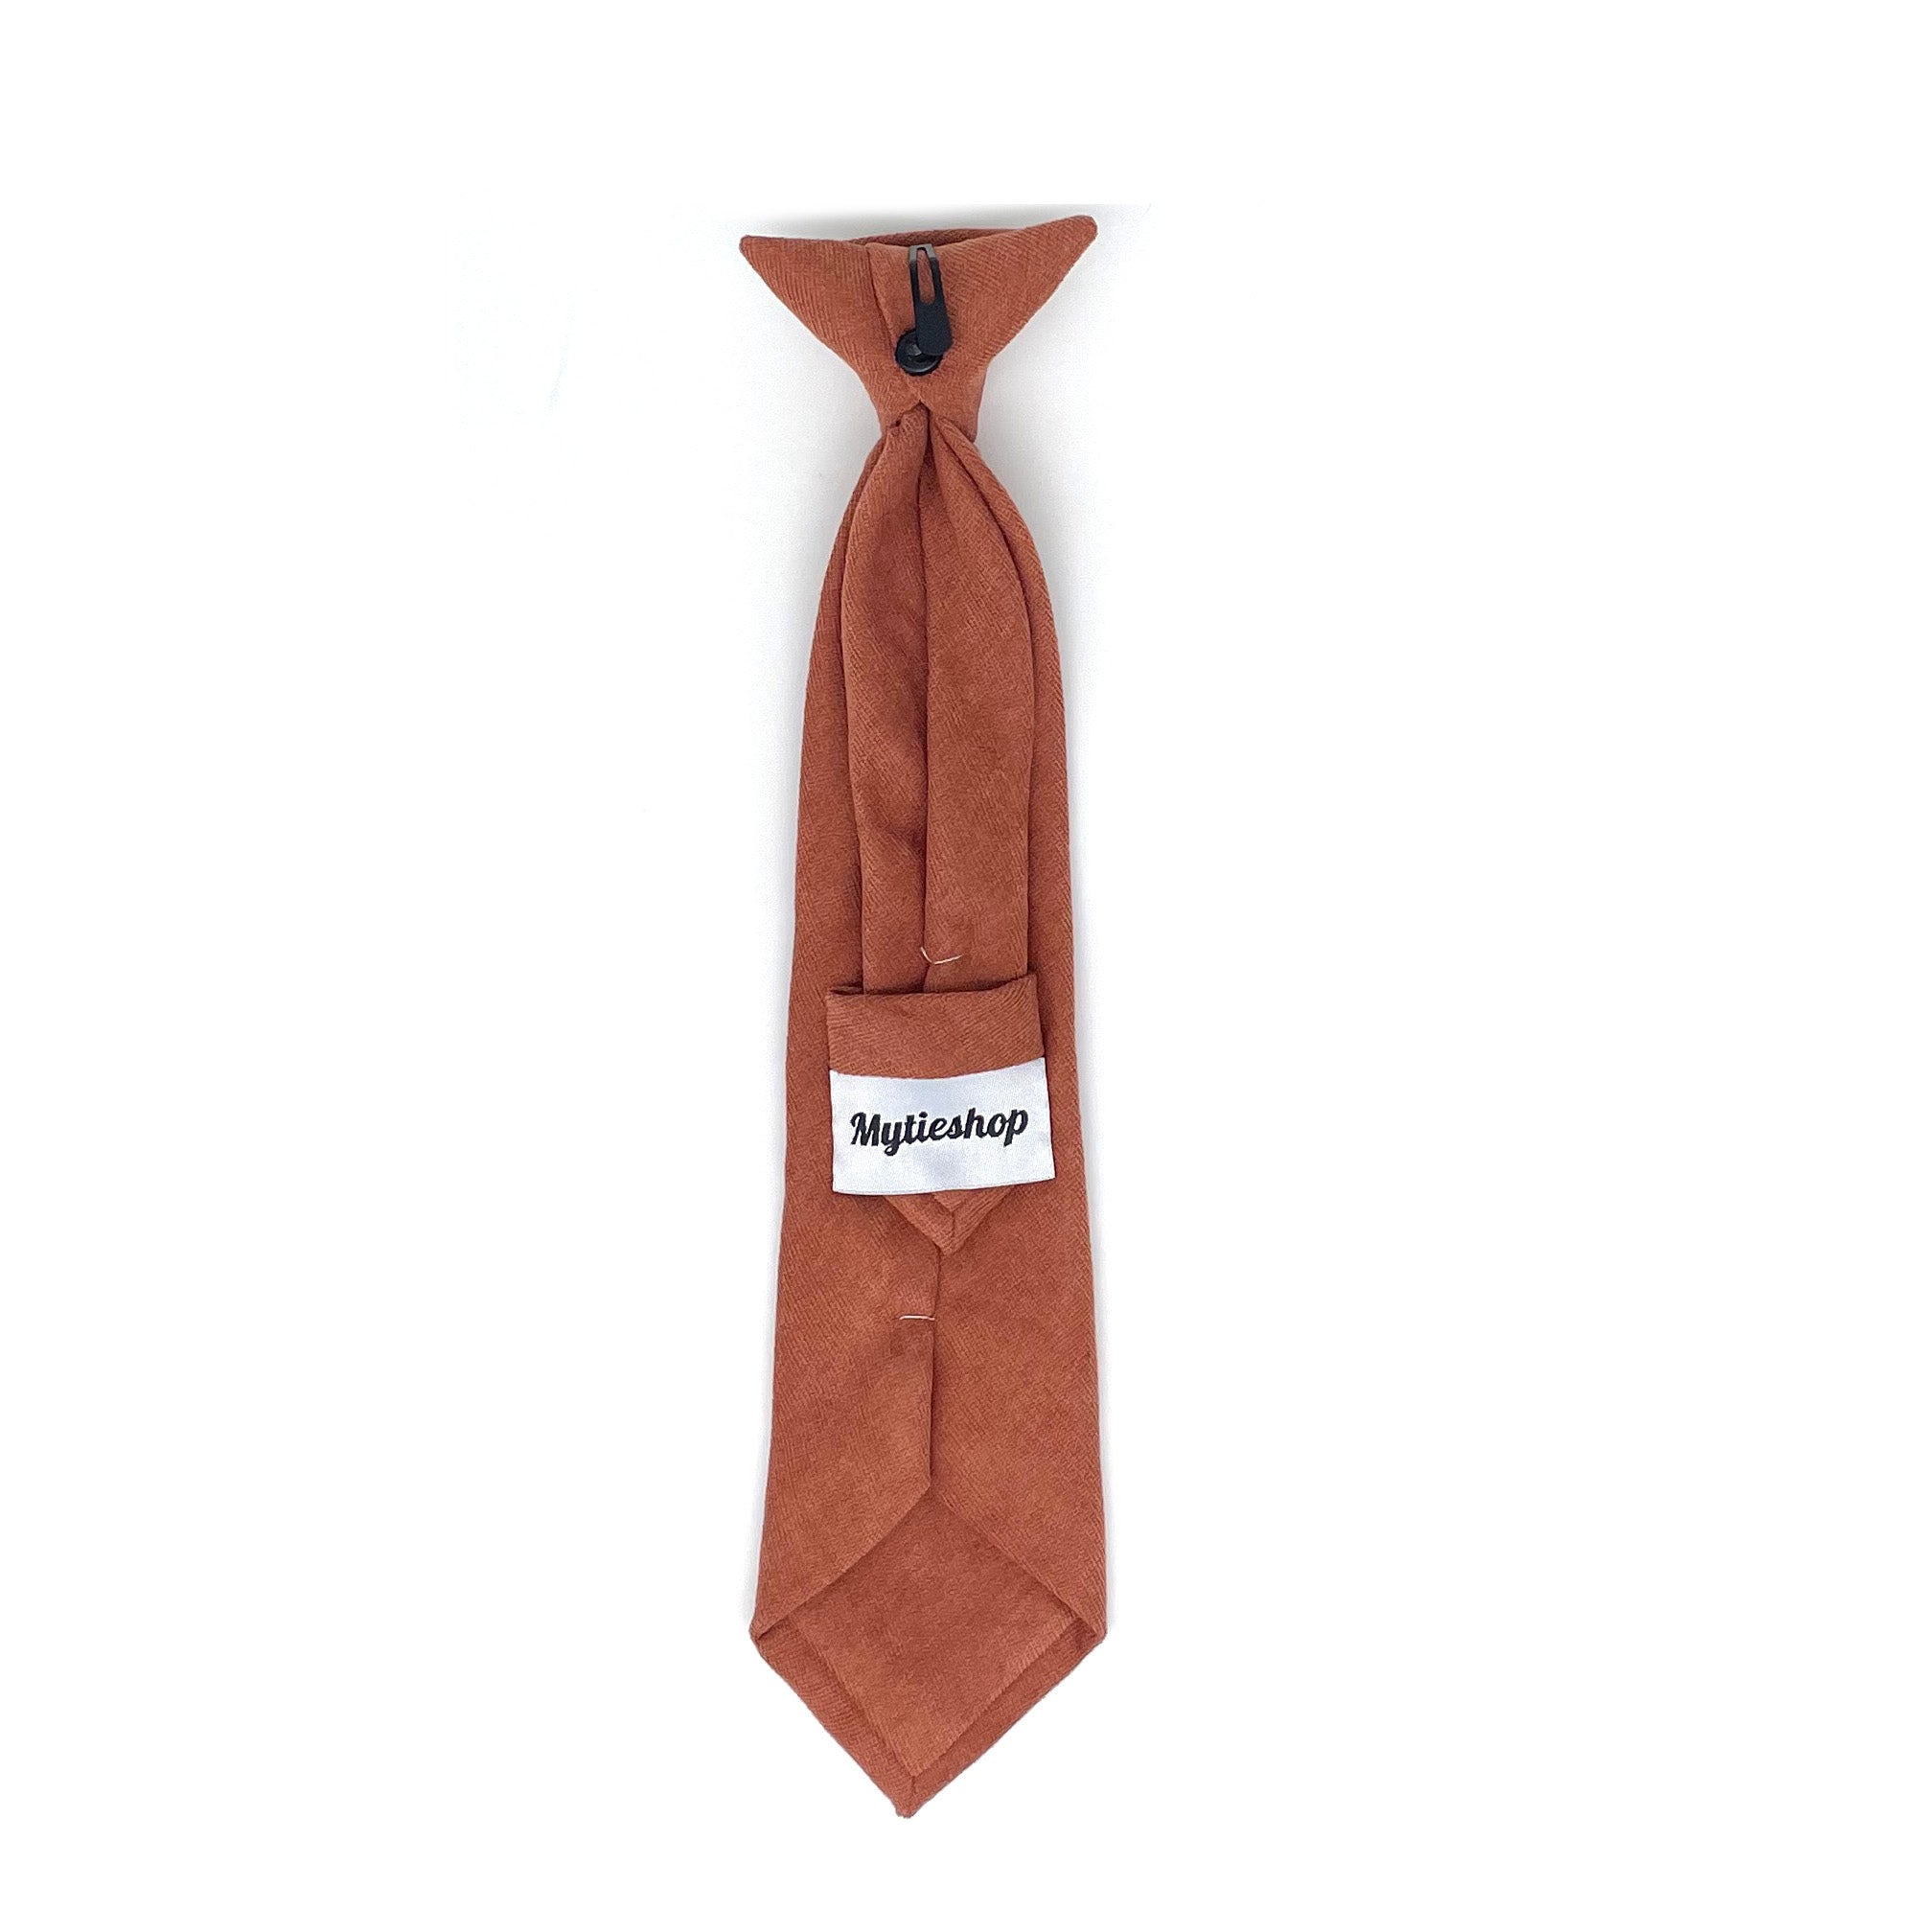 Clip on tie for kids Terracotta AUTUMN-Clip on tie for kids And Children; Junior Groomsmen Material: Suede Approx Size: Color: Terracotta Max width: 6.5 cm / 2.4 inches 9-24 months 26 CM2-5 years 31 CM9-11 Years 43 CM Add a pop of color to your little one's outfit with this Autumn Boys Floral Clip On Tie. This tie is perfect for any formal occasion, whether it's a wedding or family gathering. The clip-on design makes it easy to put on and take off, and the 2.36" size is perfect for toddlers and 